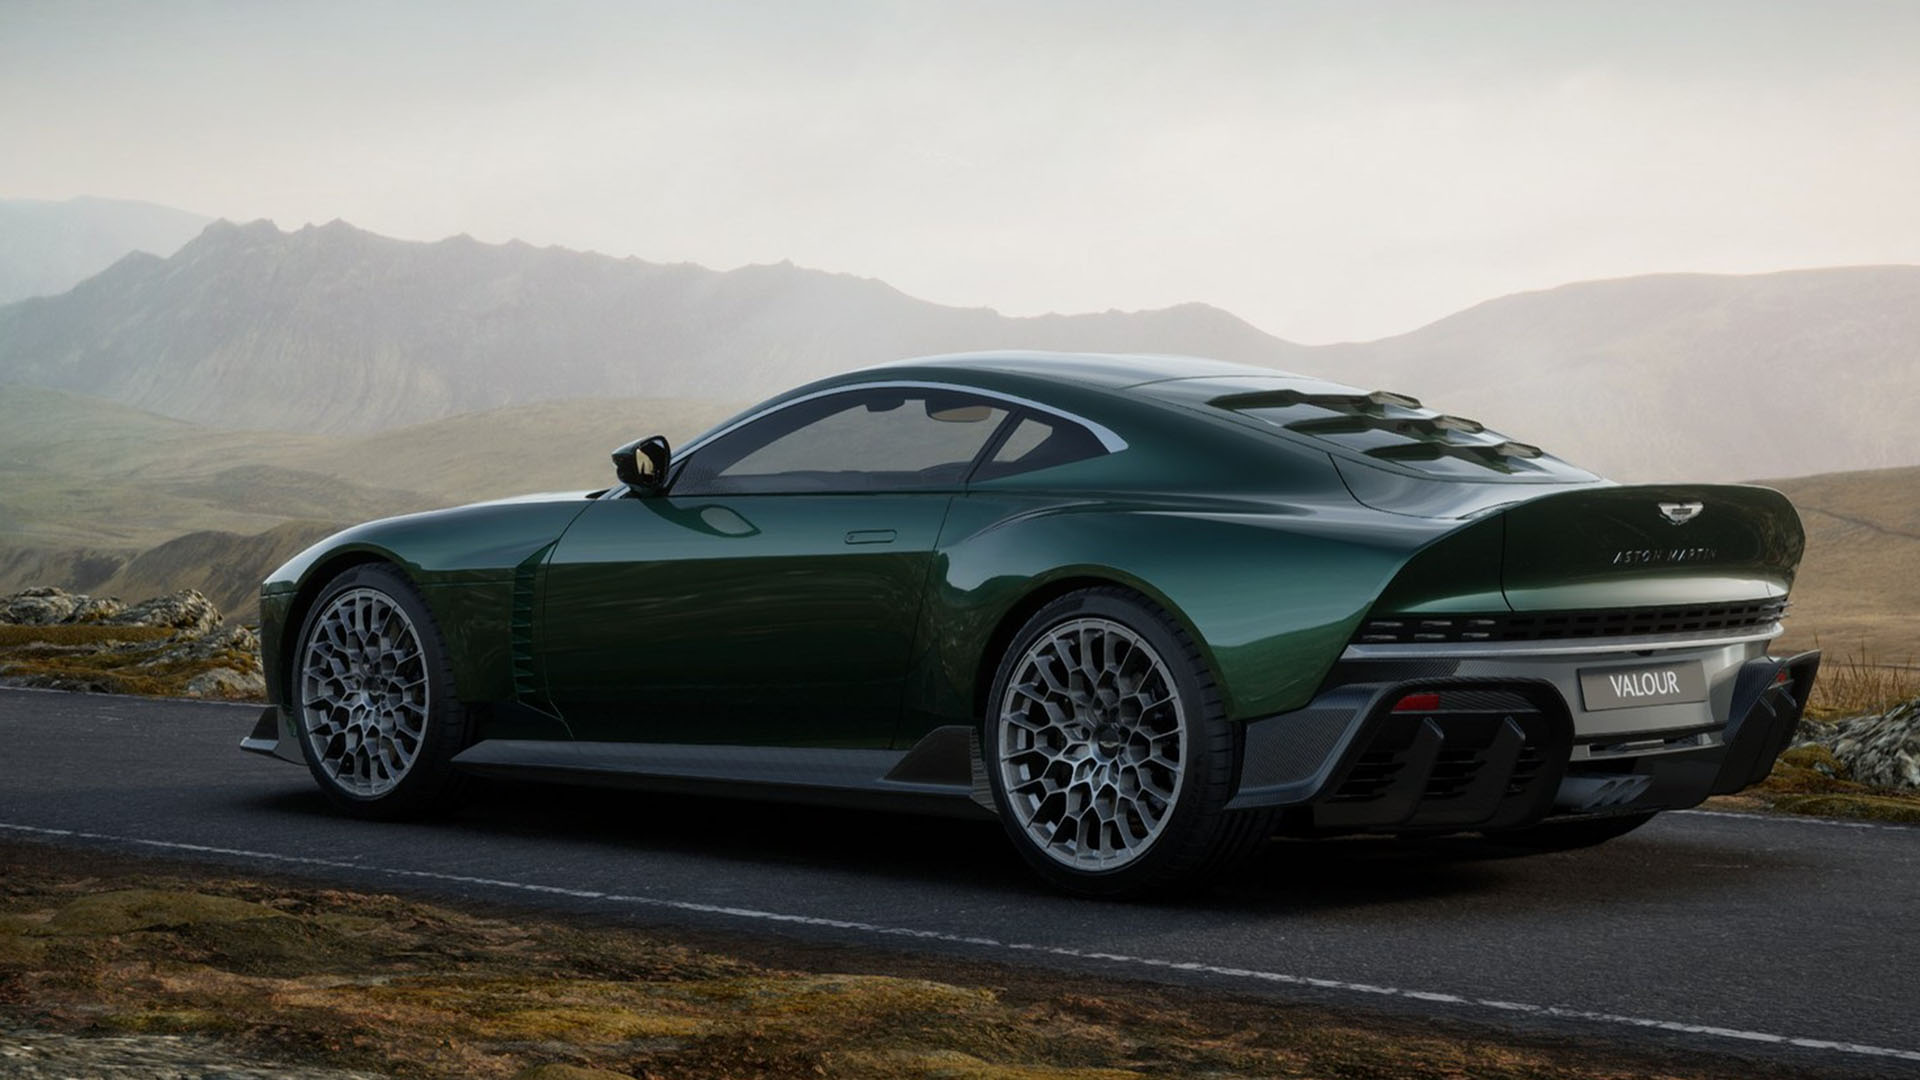 Aston Martin Victor is a V12 one-off masterpiece based on the One